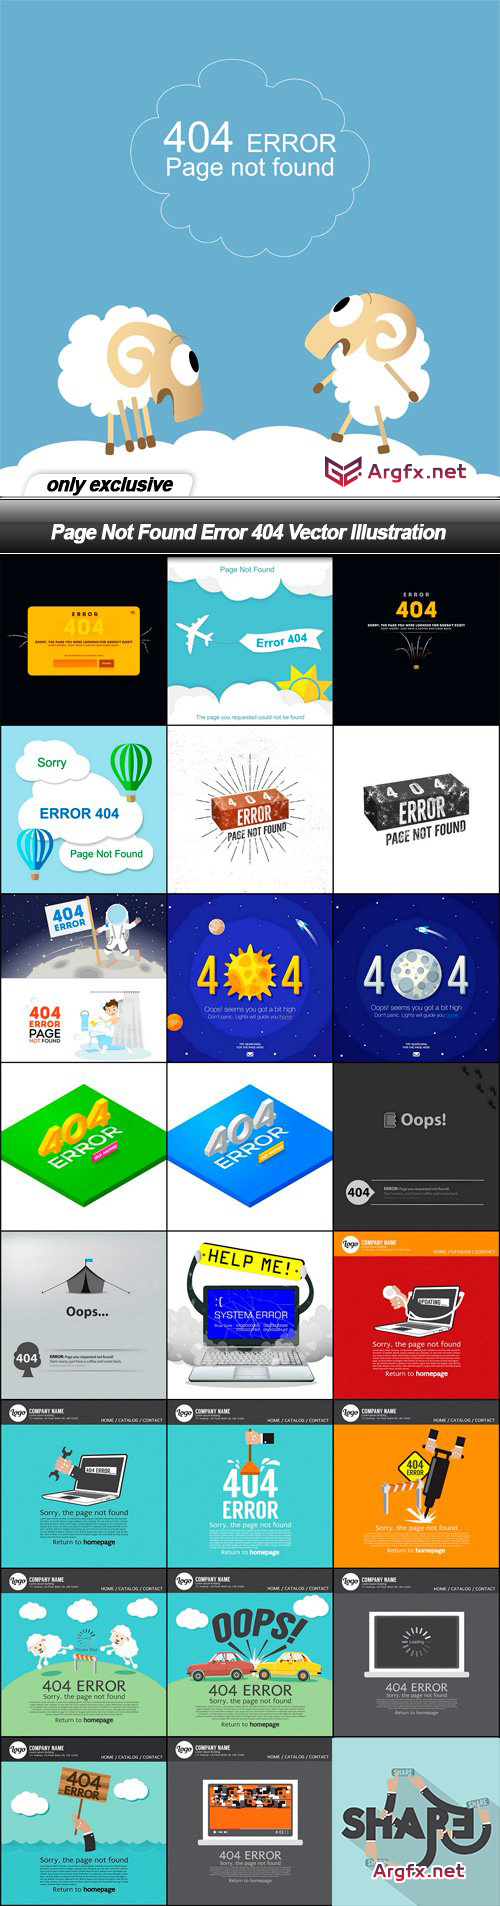  Page Not Found Error 404 Vector Illustration - 25 EPS